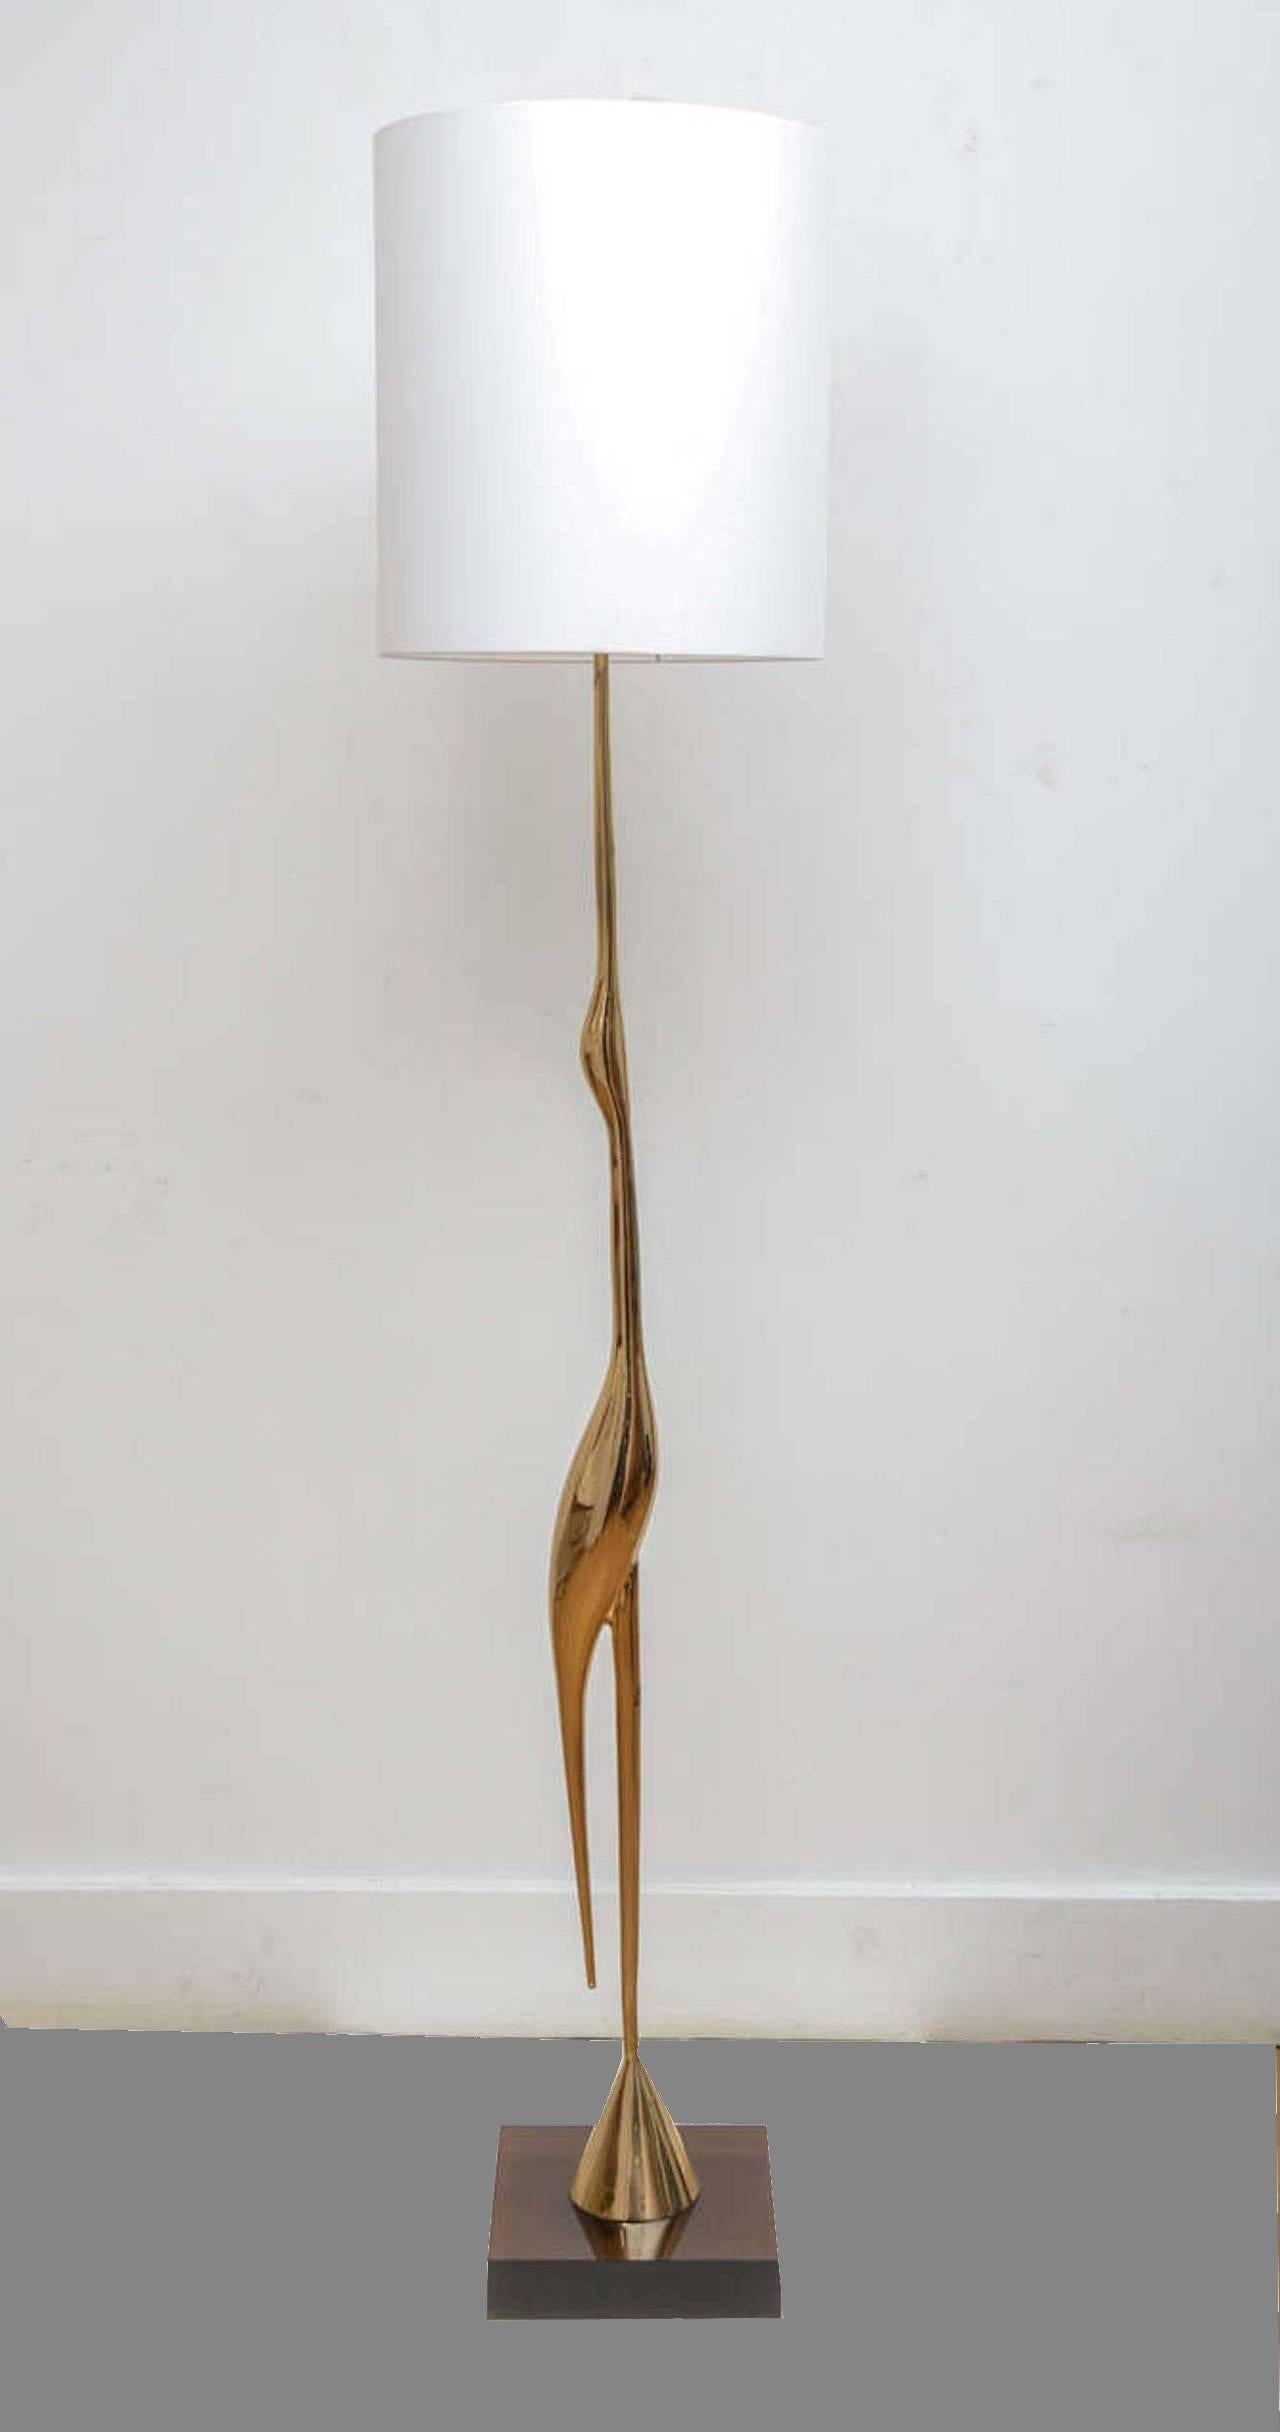 Polished bronze “Héron” floor lamp, circa 1970, by René Broissand (born in 1928). On a square brown Lucite base. Signed and numbered 63.
New lampshade redone as original. Three lights.

Dimensions without lampshade are:
Height: 171 cm.
Square